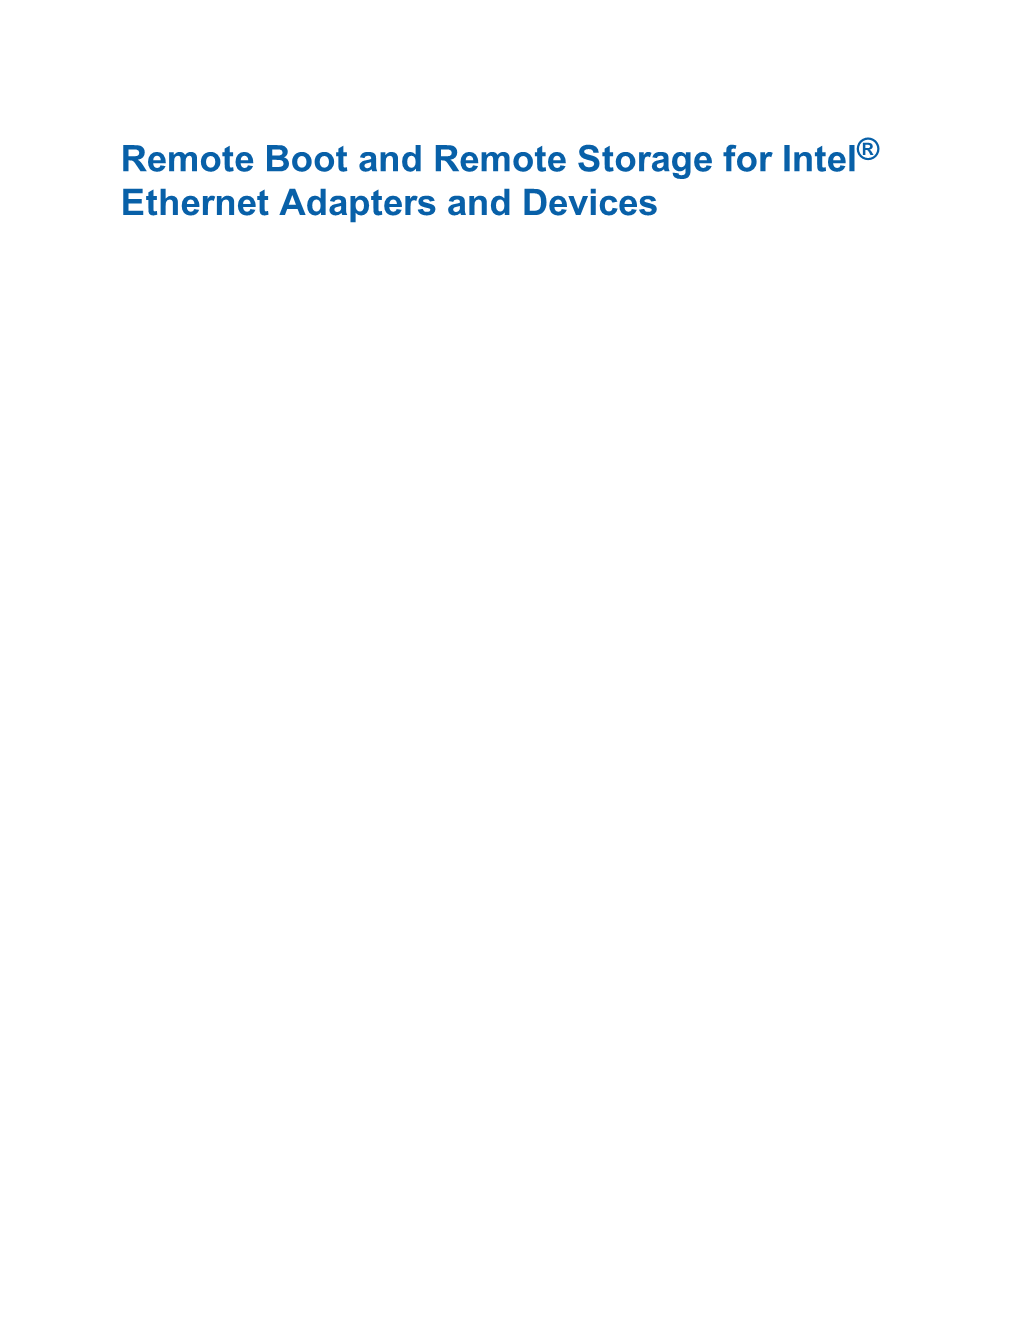 Remote Boot and Storage Guide for Intel® Ethernet Adapters and Devices